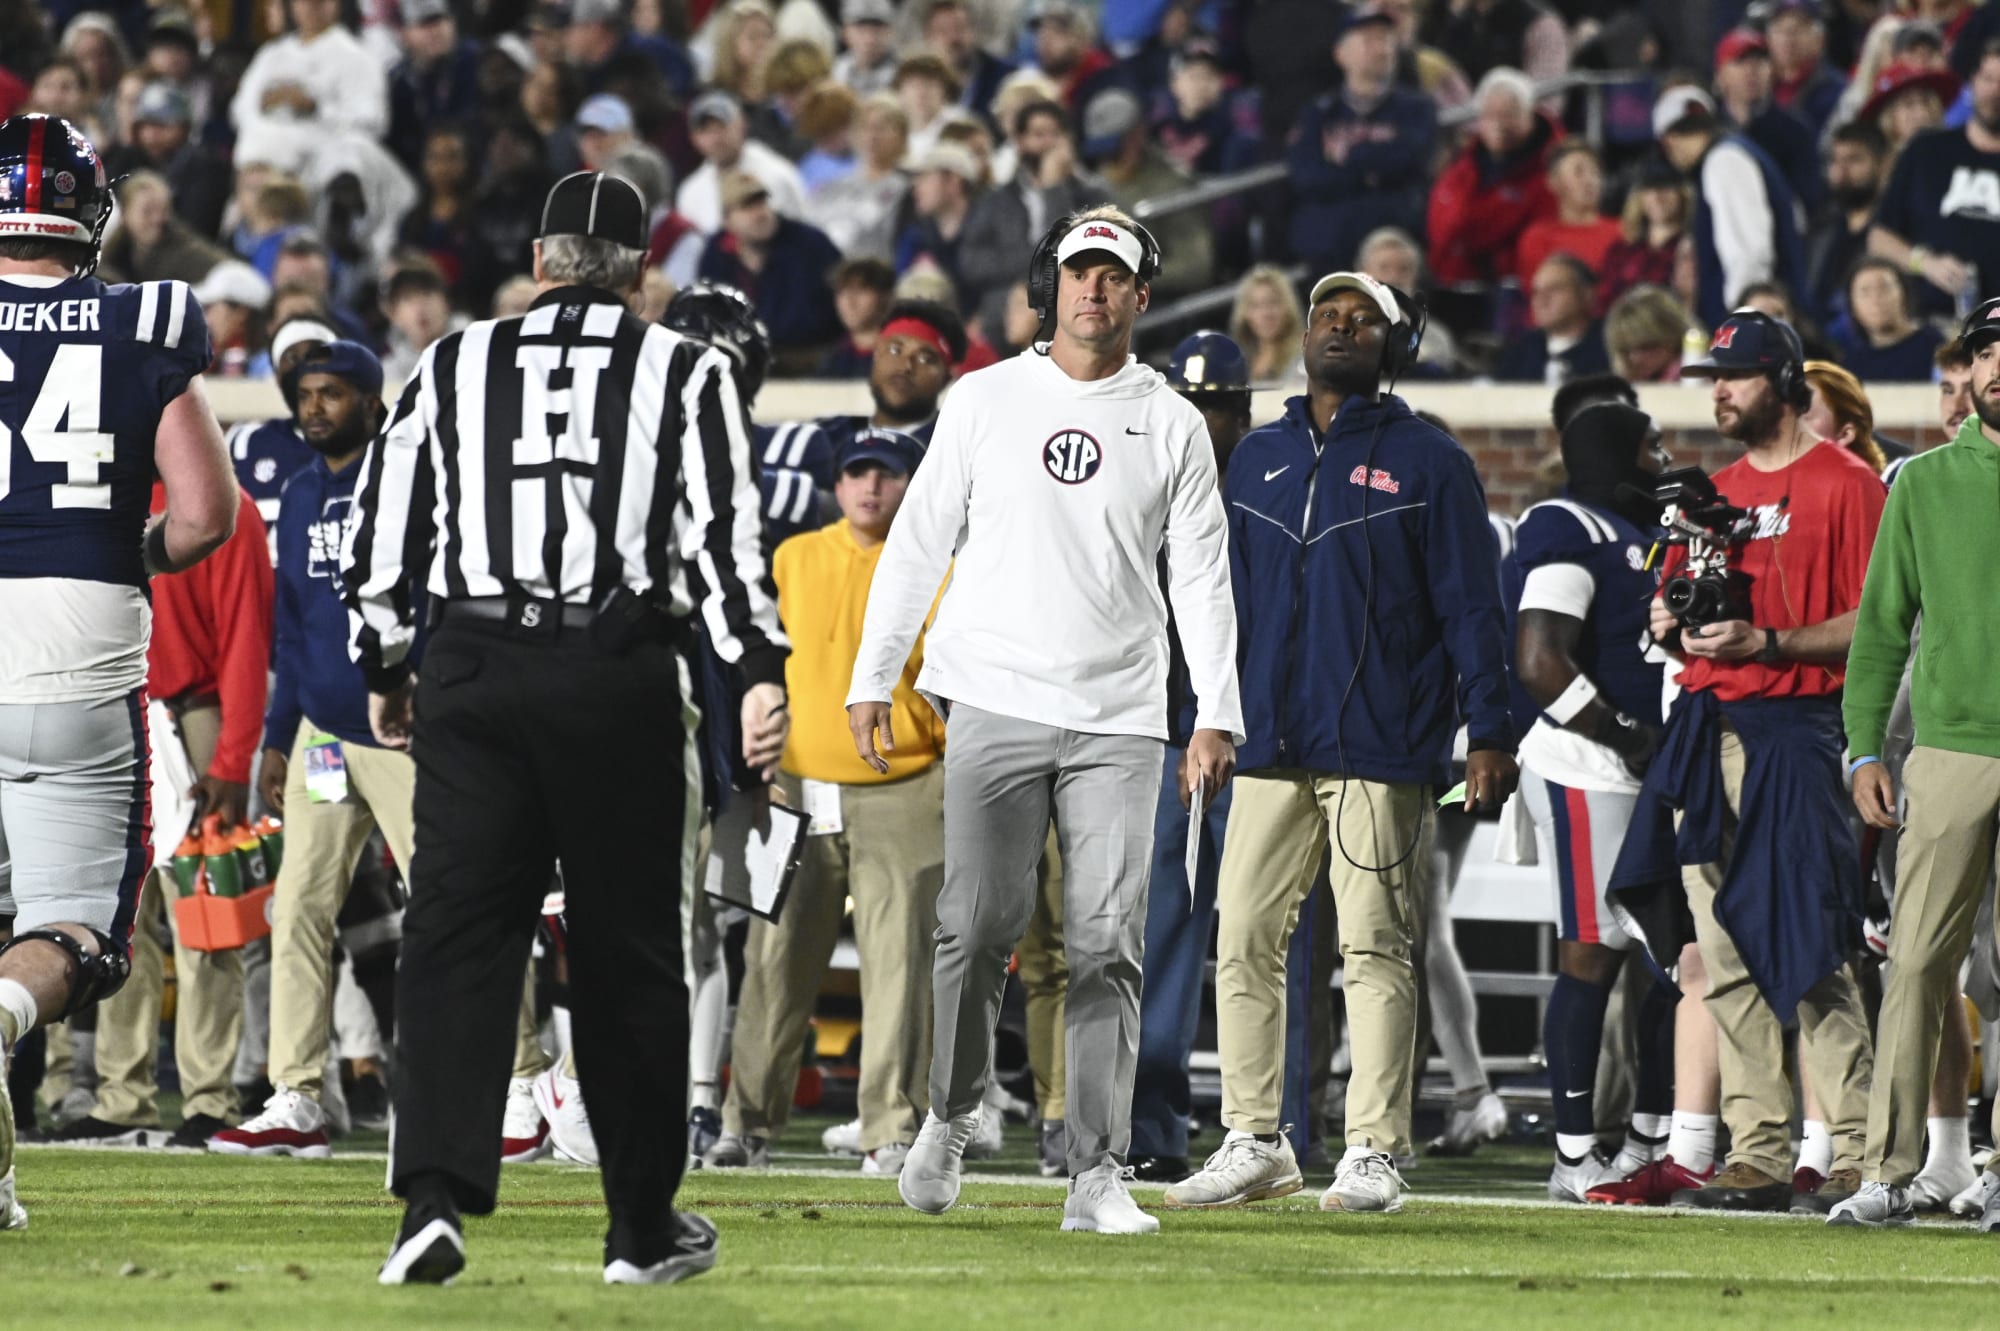 Egg Bowl descends into complete fan chaos Here's everything that